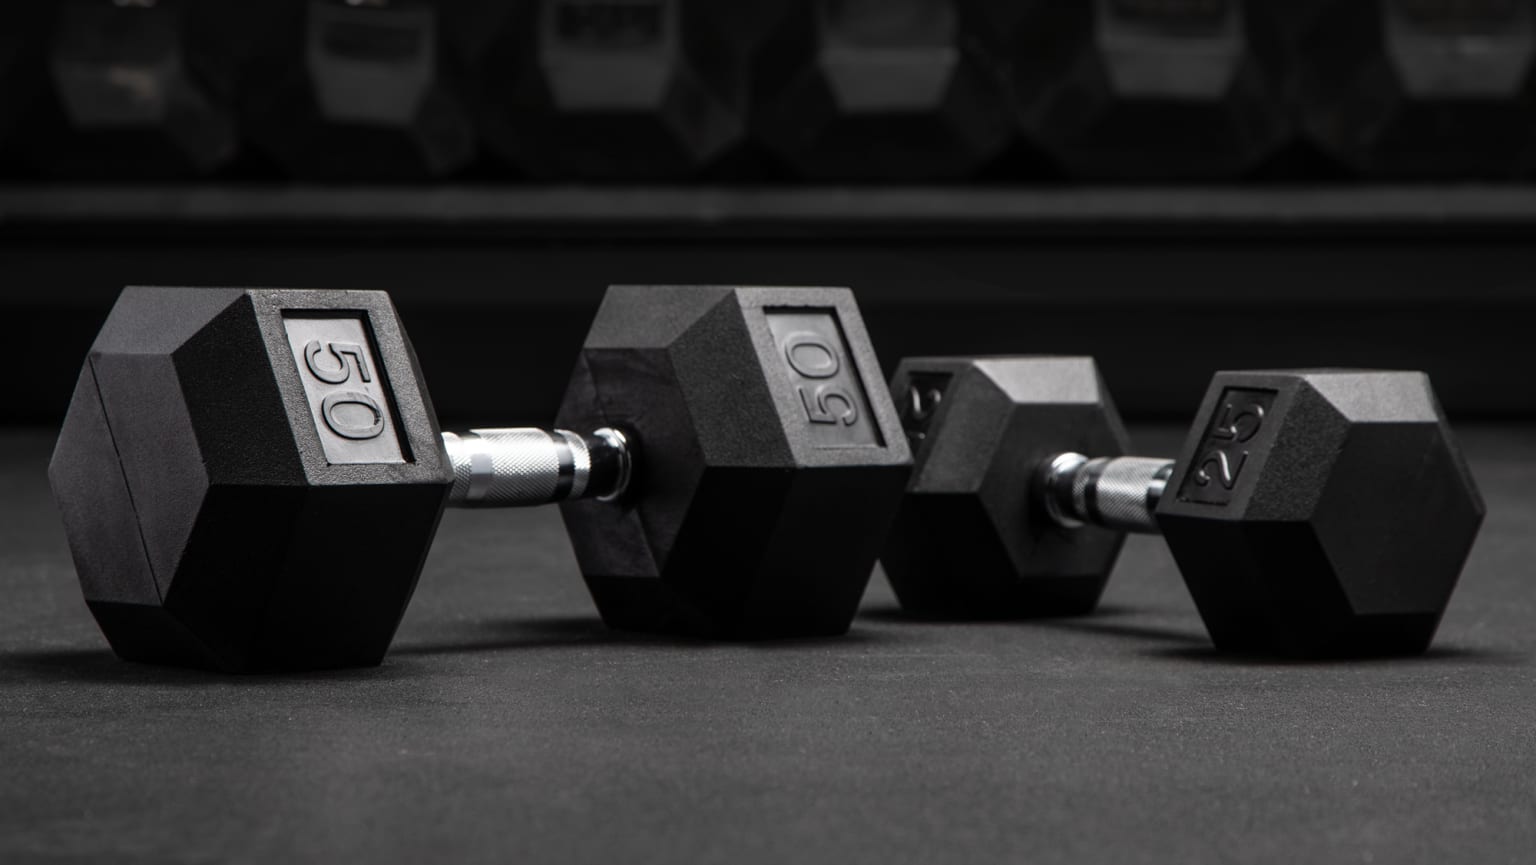 100 Lb Total Best Price Made In USA ROGUE 50 Lb Pair Hex dumbbells 